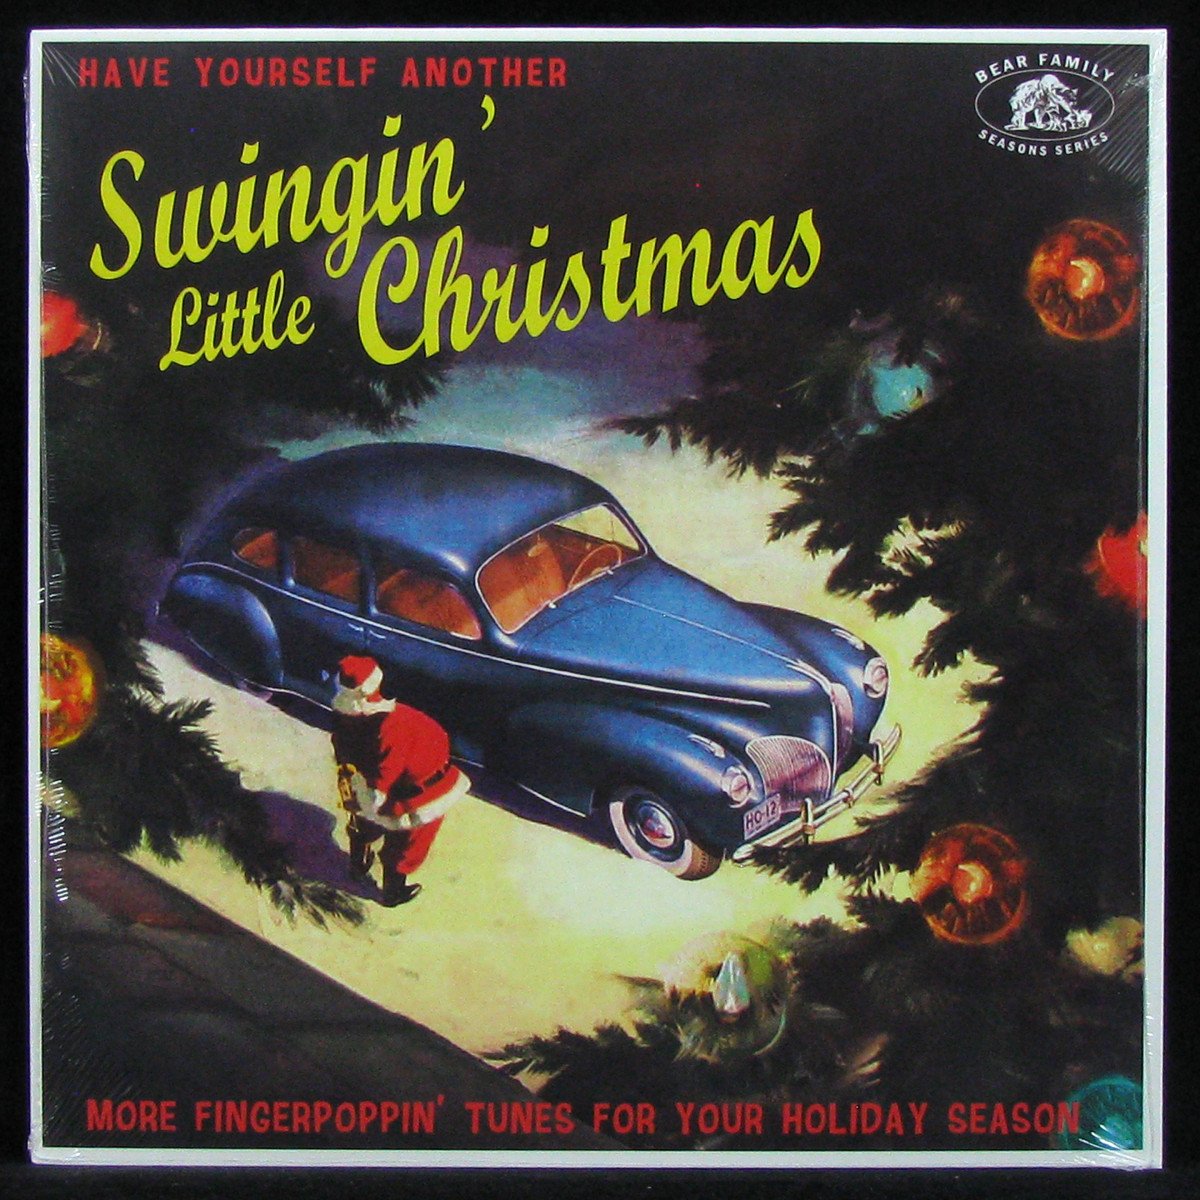 Have Yourself Another Swingin' Little Christmas (More Fingerpoppin' Tunes For Your Holiday Season)